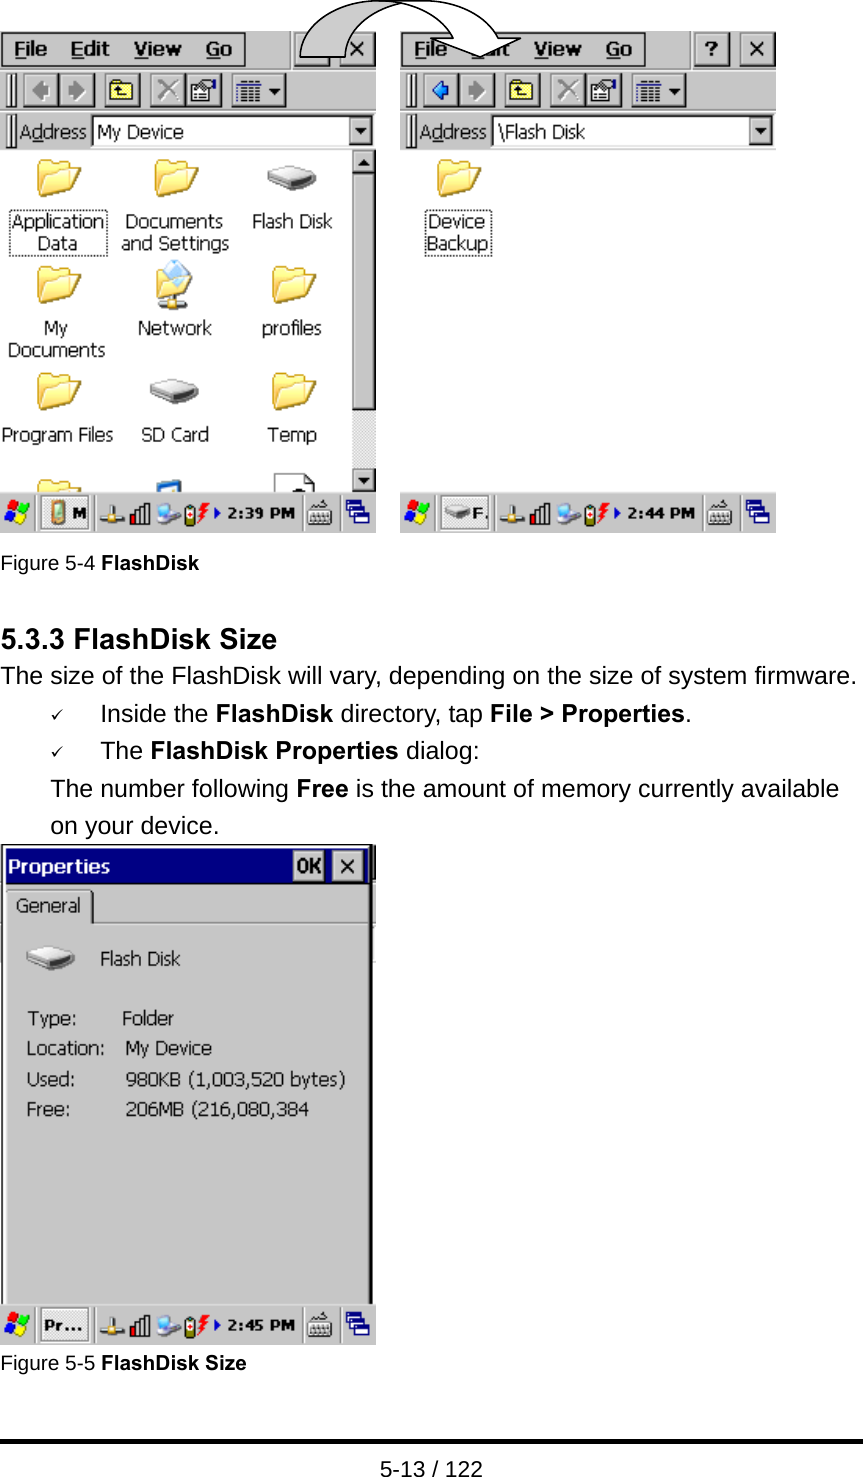  5-13 / 122      Figure 5-4 FlashDisk  5.3.3 FlashDisk Size The size of the FlashDisk will vary, depending on the size of system firmware. 9 Inside the FlashDisk directory, tap File &gt; Properties. 9 The FlashDisk Properties dialog: The number following Free is the amount of memory currently available on your device.  Figure 5-5 FlashDisk Size  